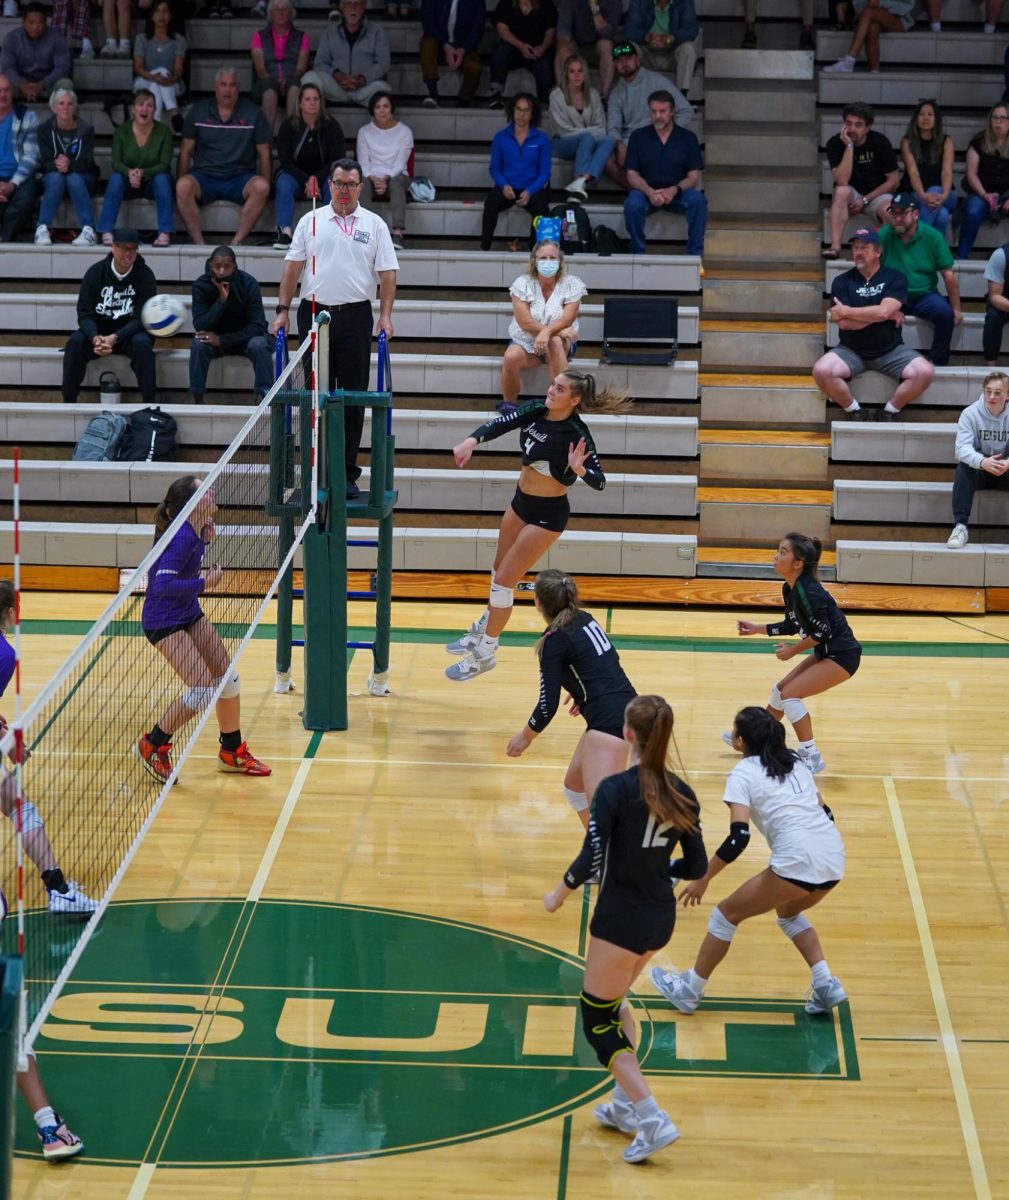 The+volleyball+team+takes+on+Sunset+in+a+Metro+League+match+on+Thursday%2C+September+13th+at+the+Knight+Gym+at+Jesuit+High+School